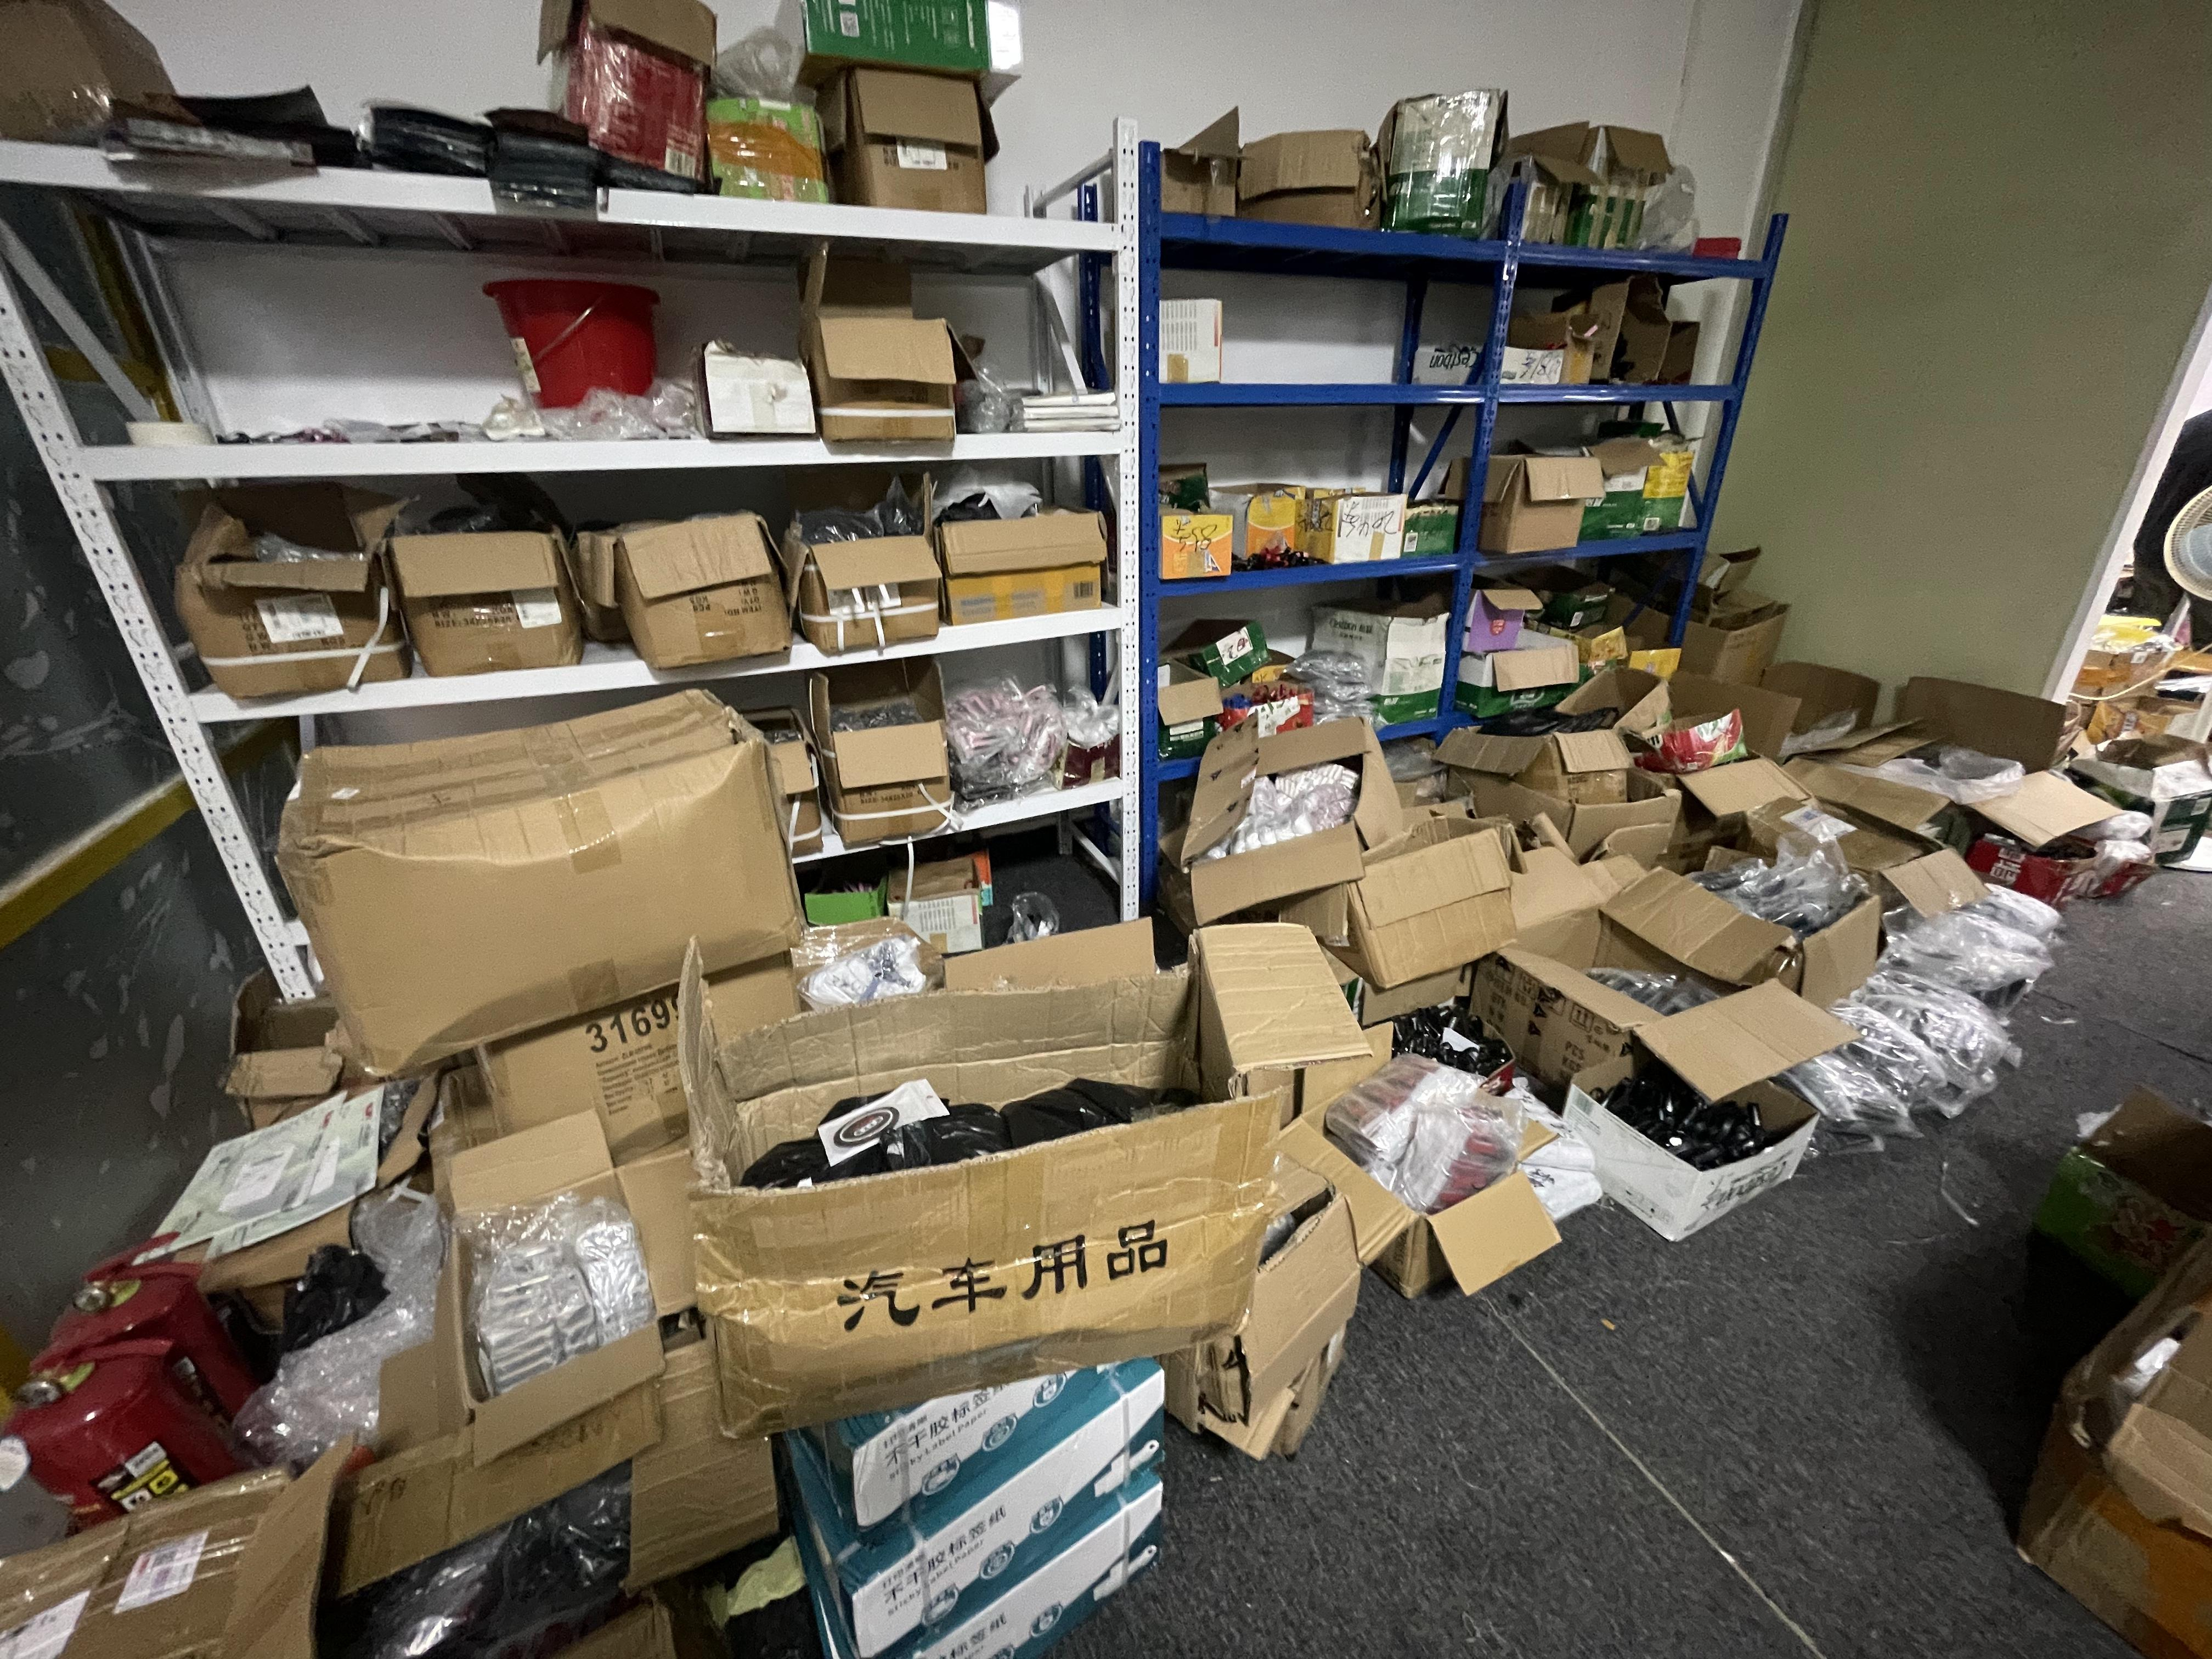 Chinese Counterfeit Products Dominate the World's Fakes Industry